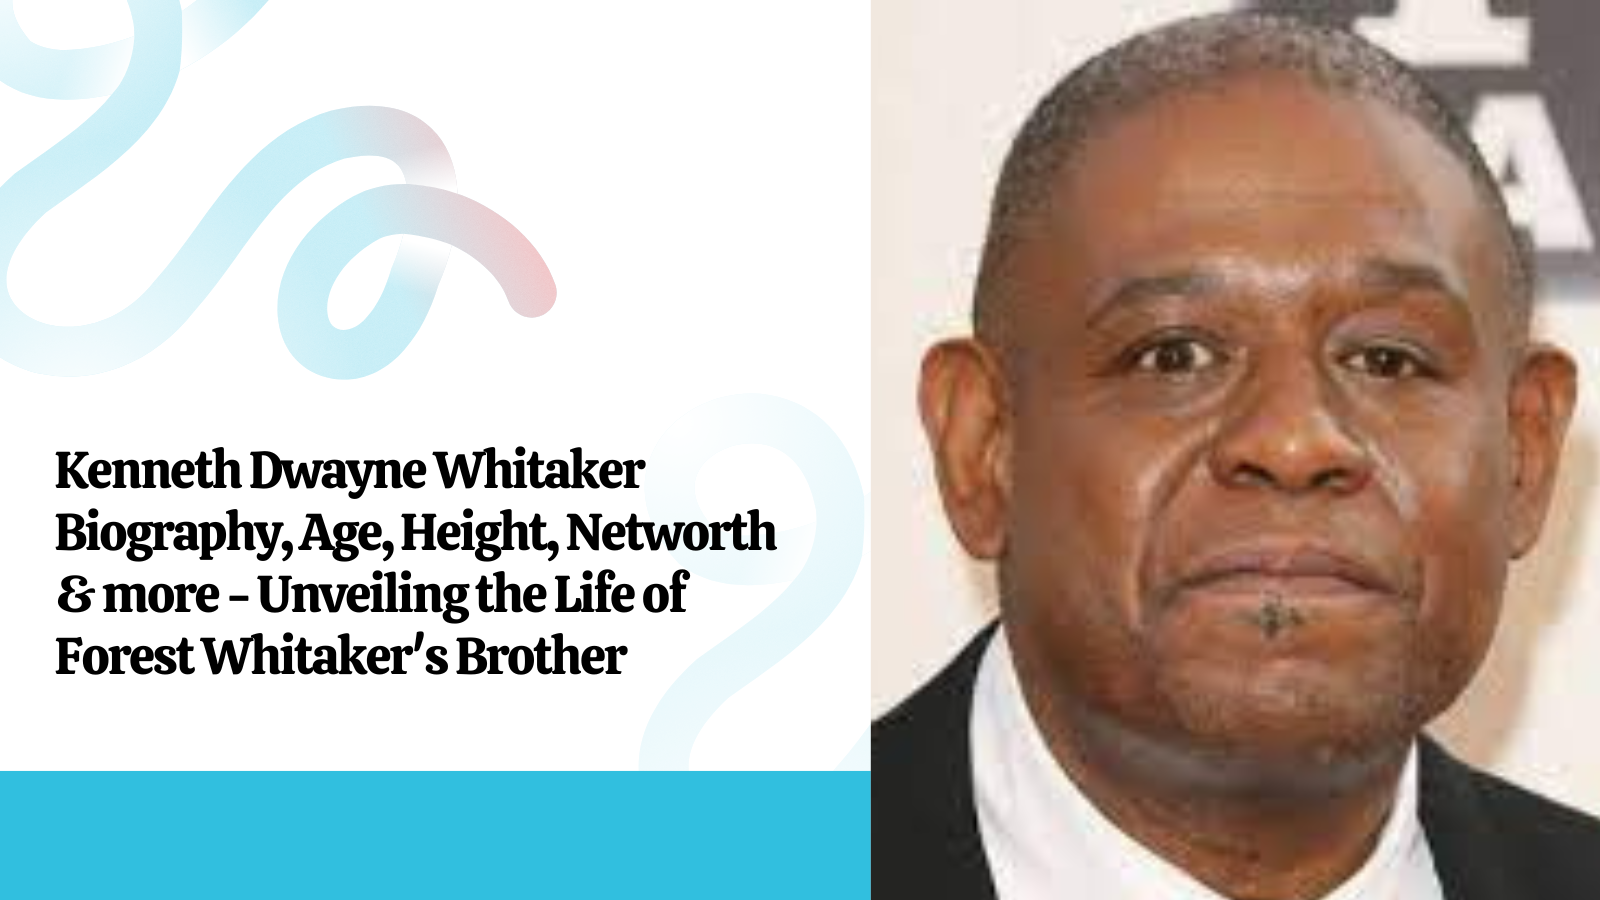 Kenneth Dwayne Whitaker Biography, Age, Height, Networth & more - Unveiling the Life of Forest Whitaker's Brother